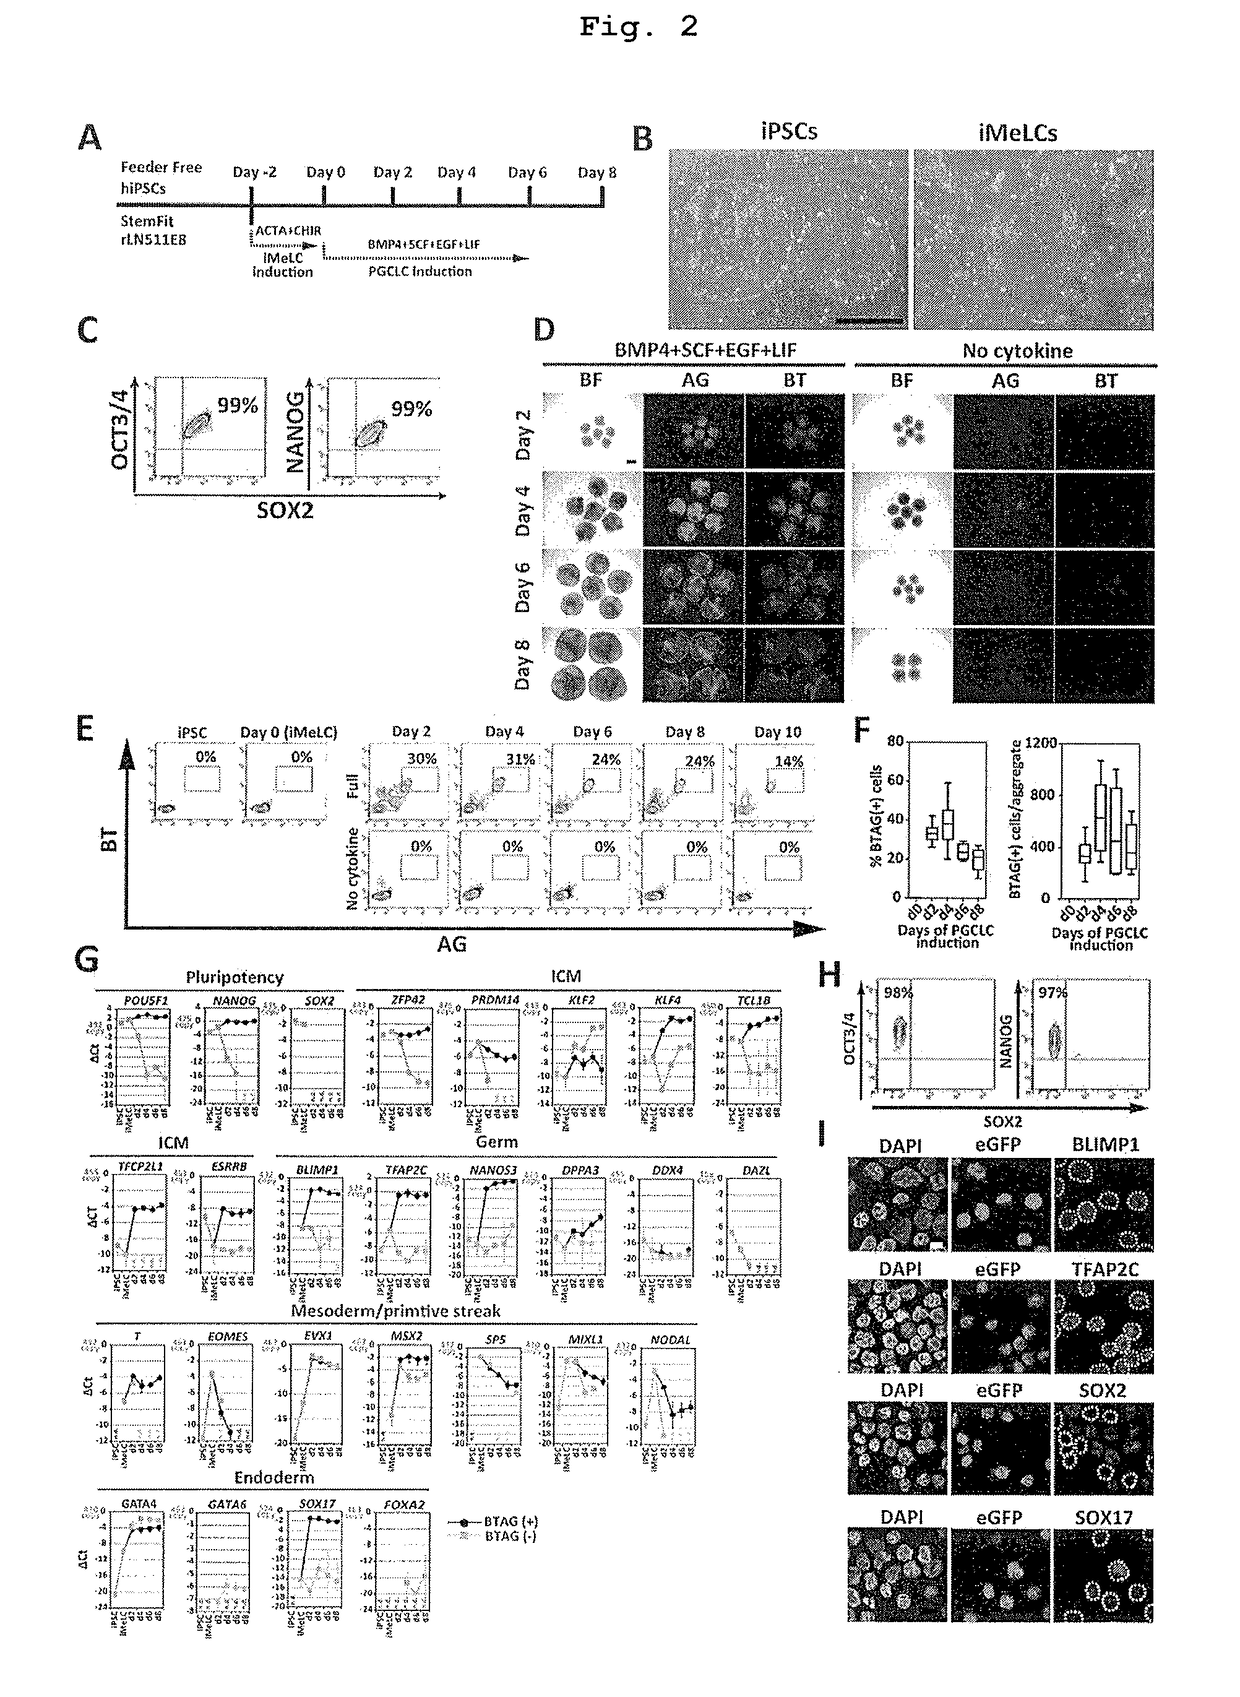 Method for inducing differentiation of pluripotent stem cells into germ cells